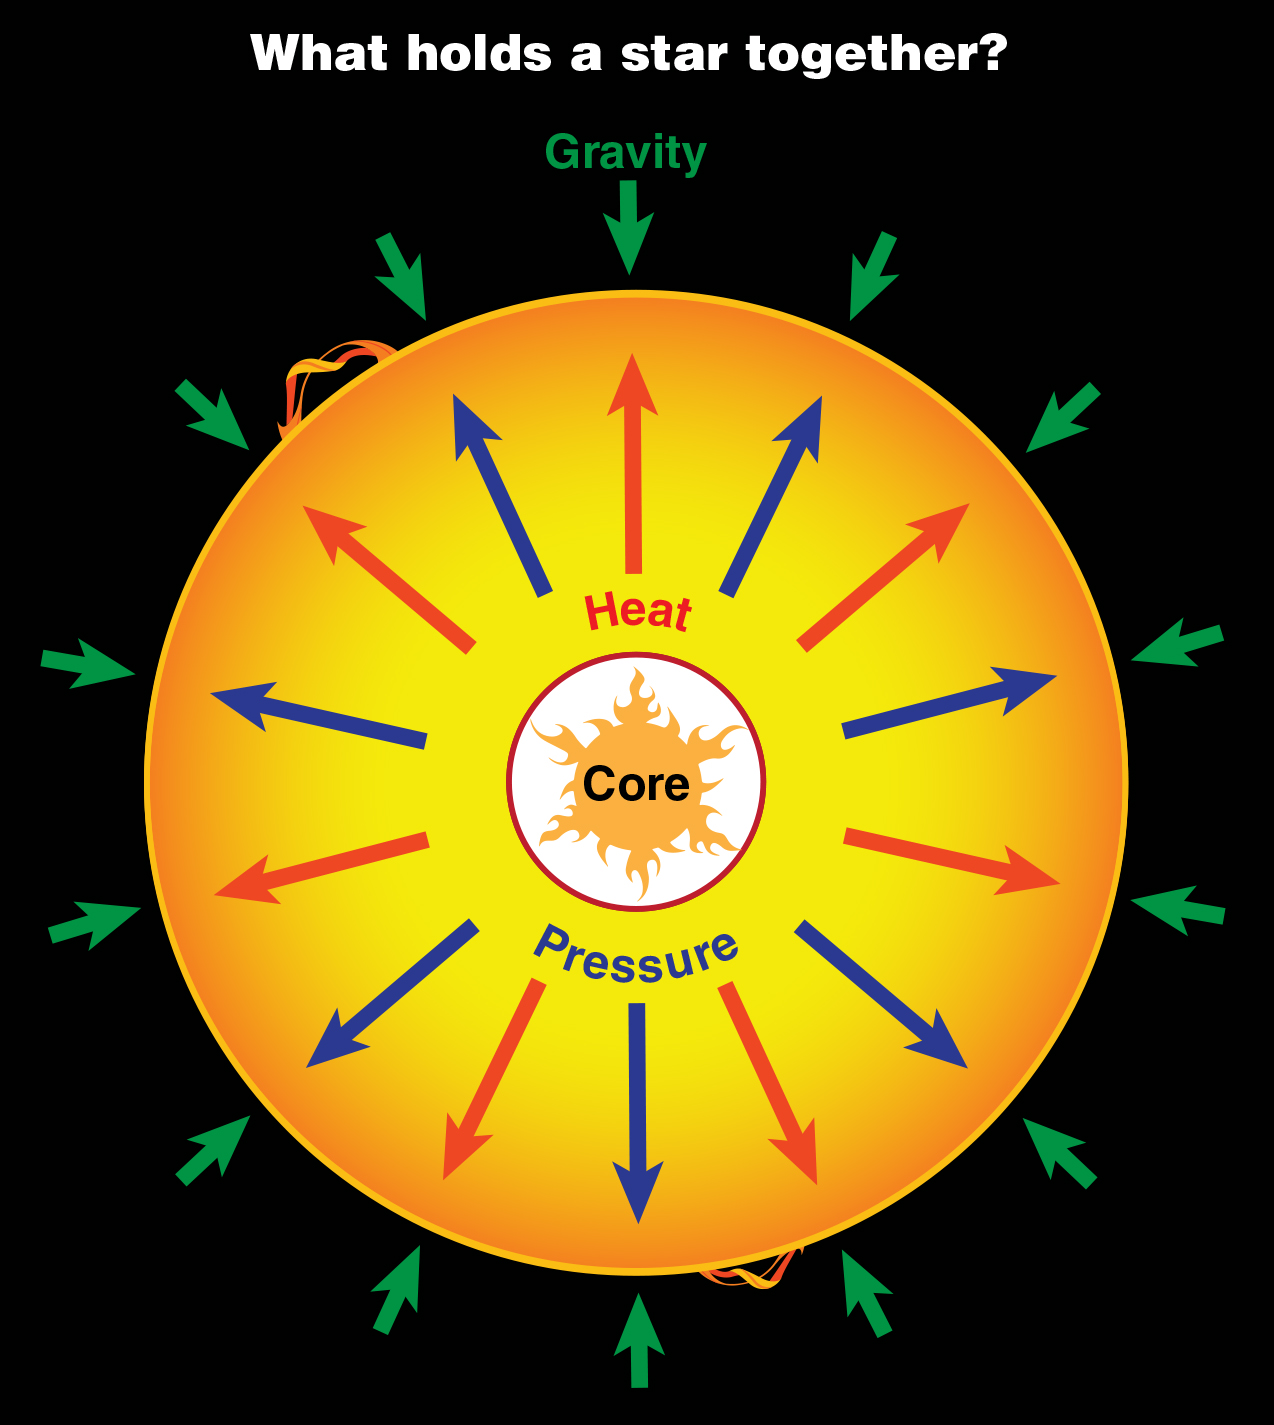 A diagram showing the balance between fusion and gravity in a star.